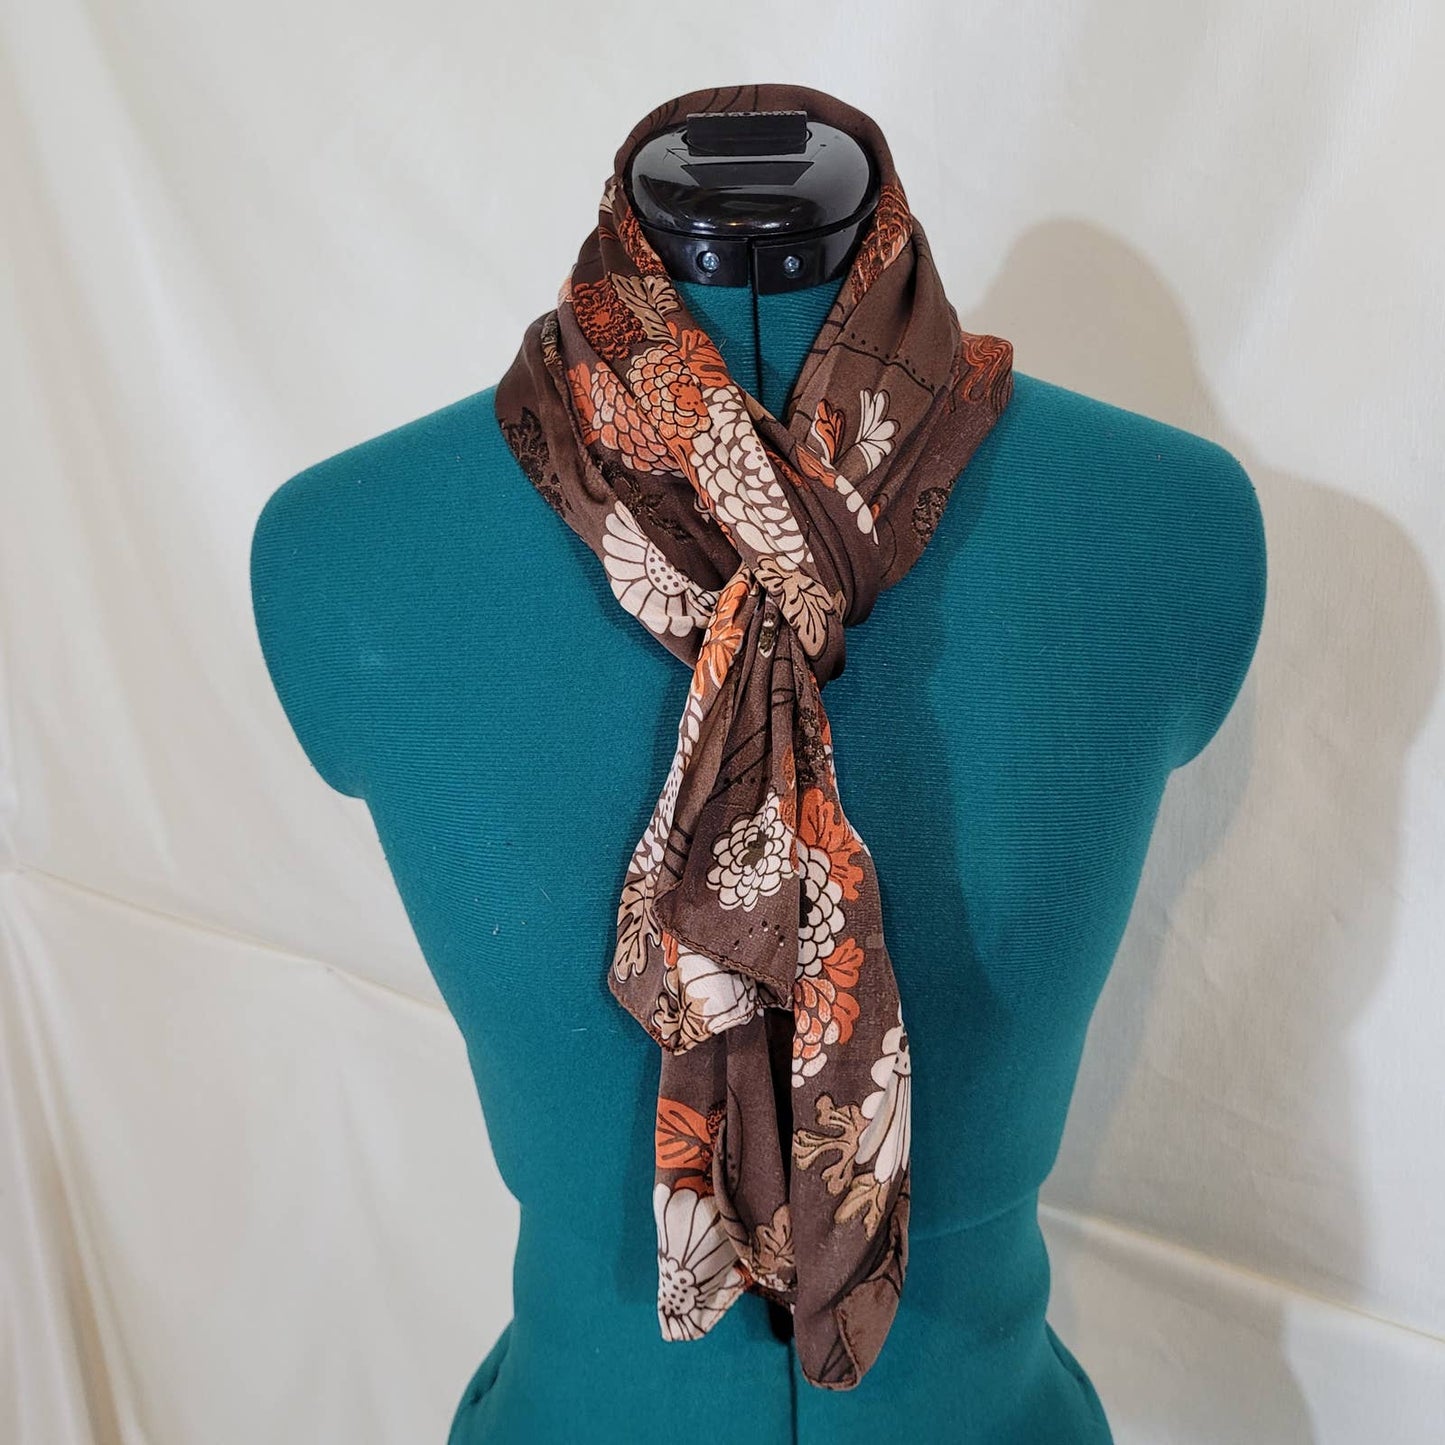 Long Brown Scarf with Orange and White Floral PatternMarkita's ClosetUnbranded